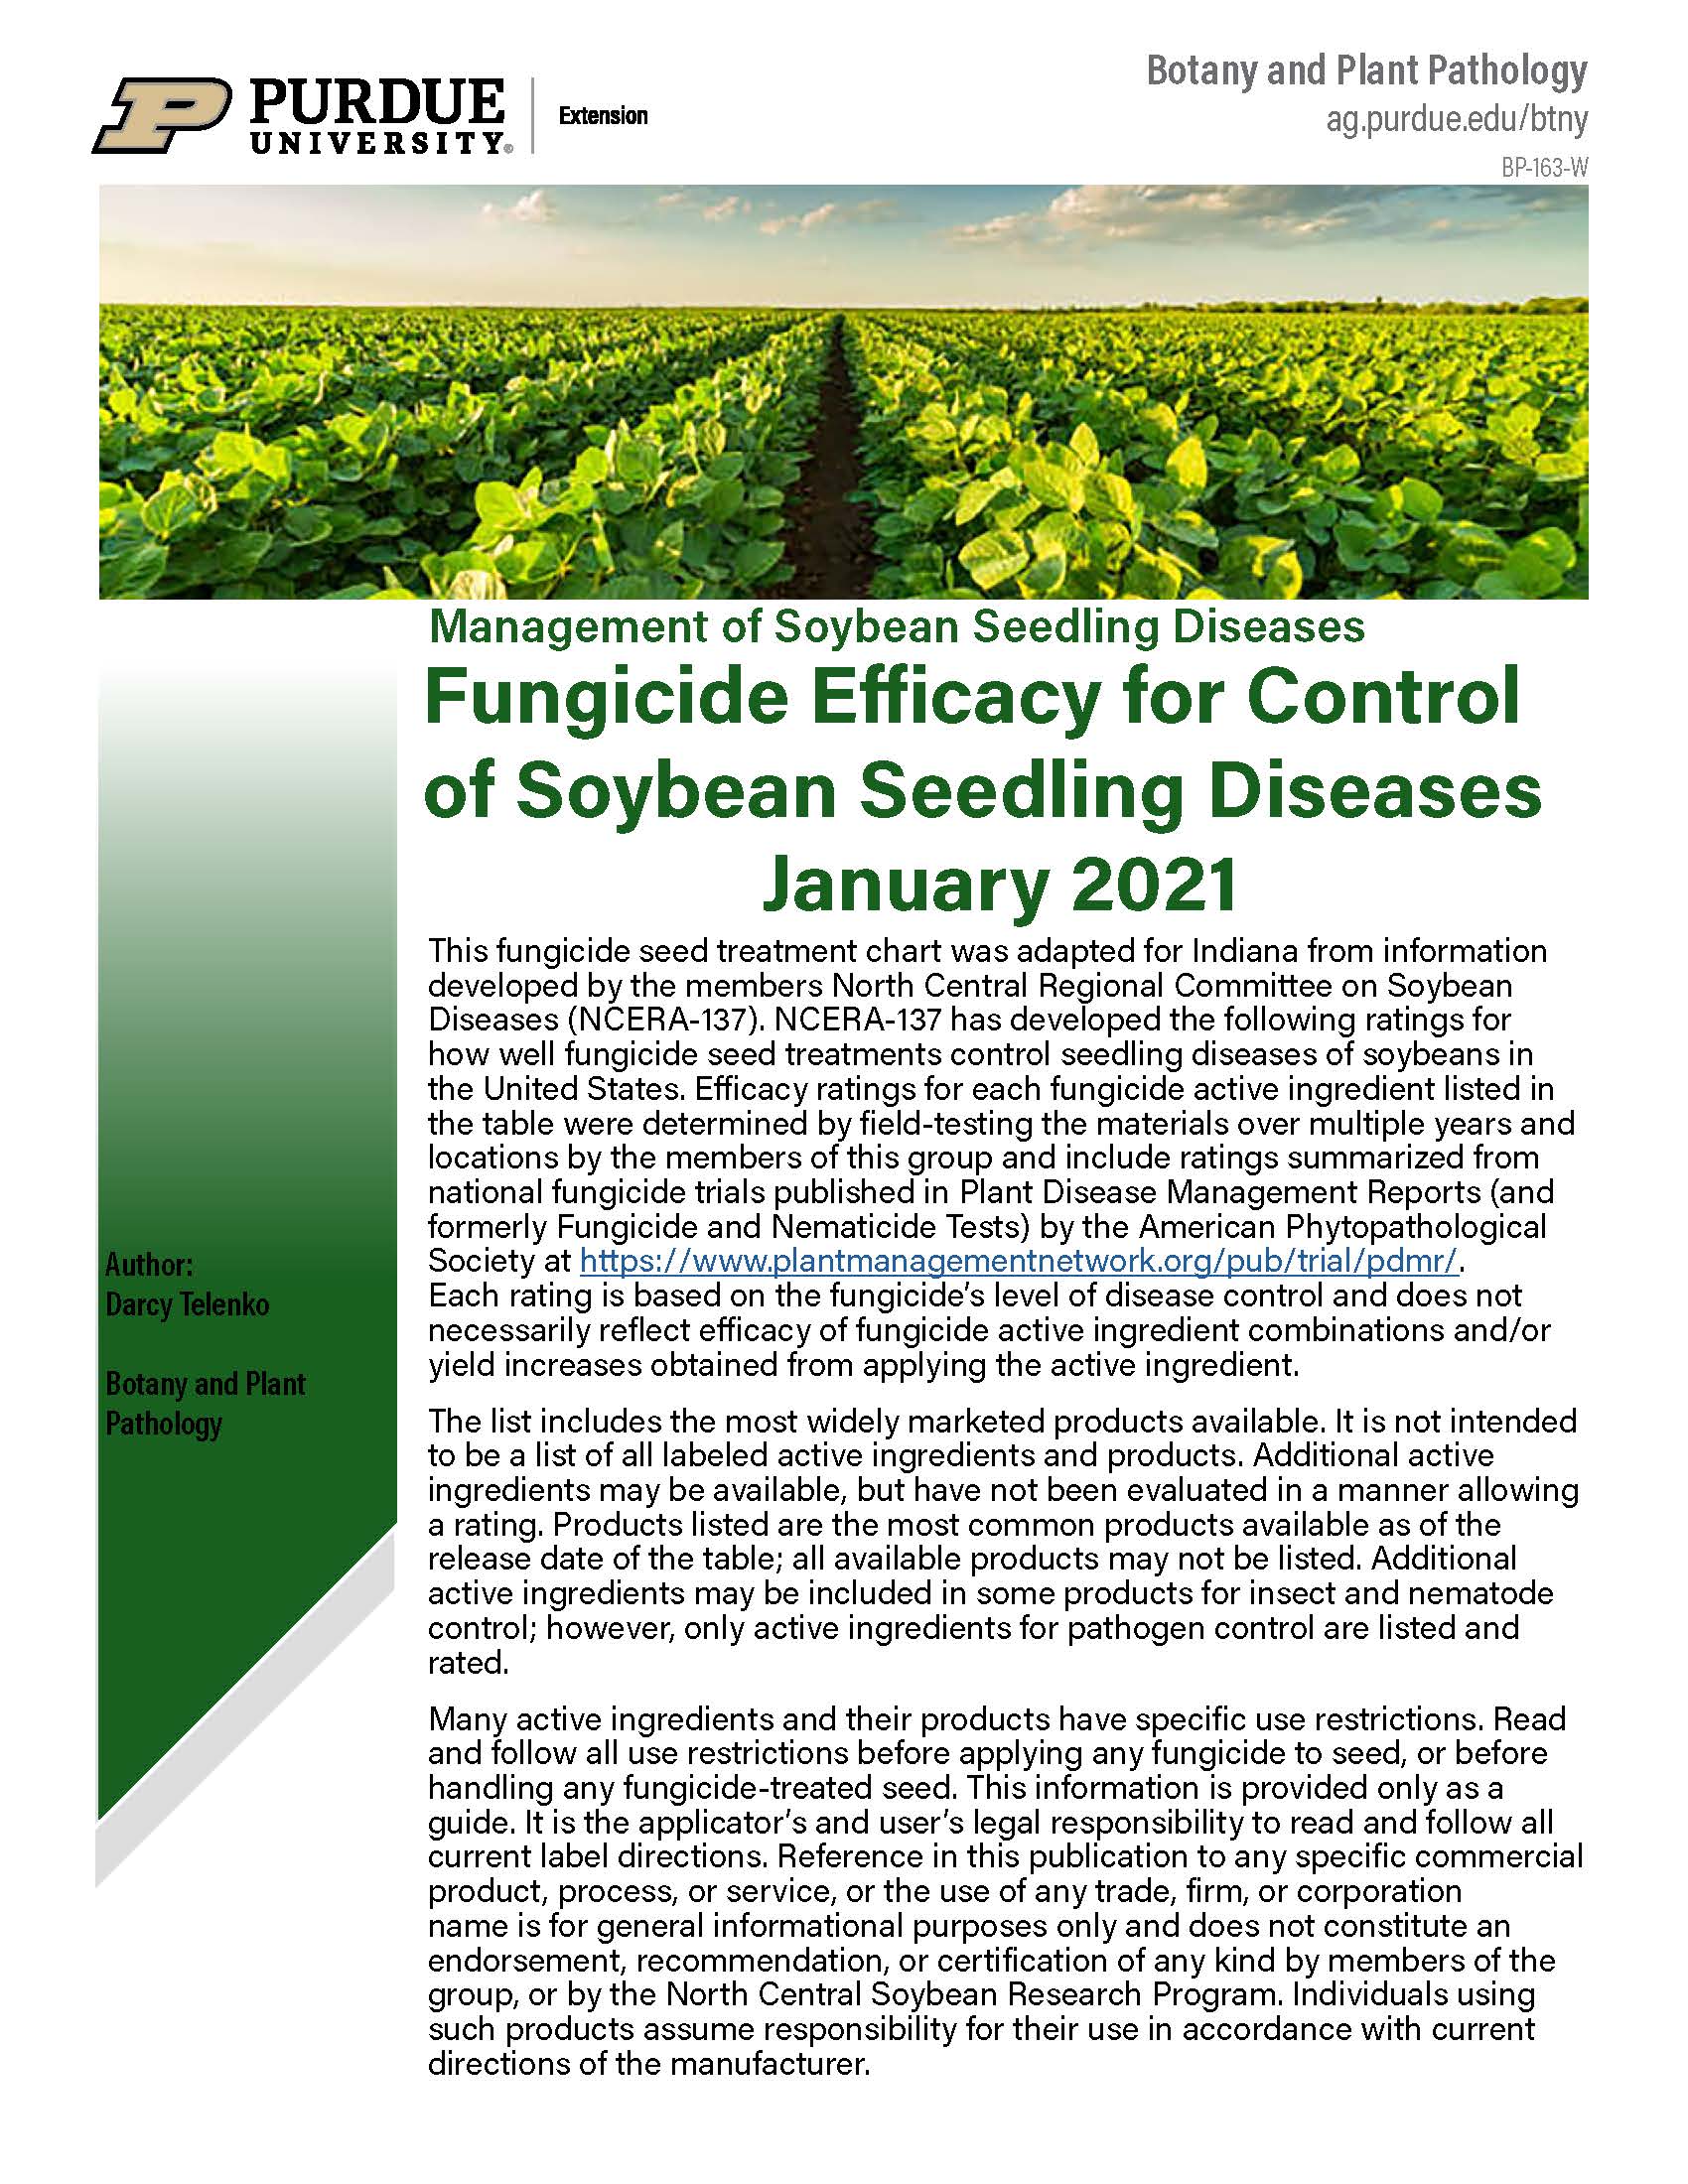 Diseases of Soybean: Fungicide Efficacy for Control of Soybean Seedling Diseases